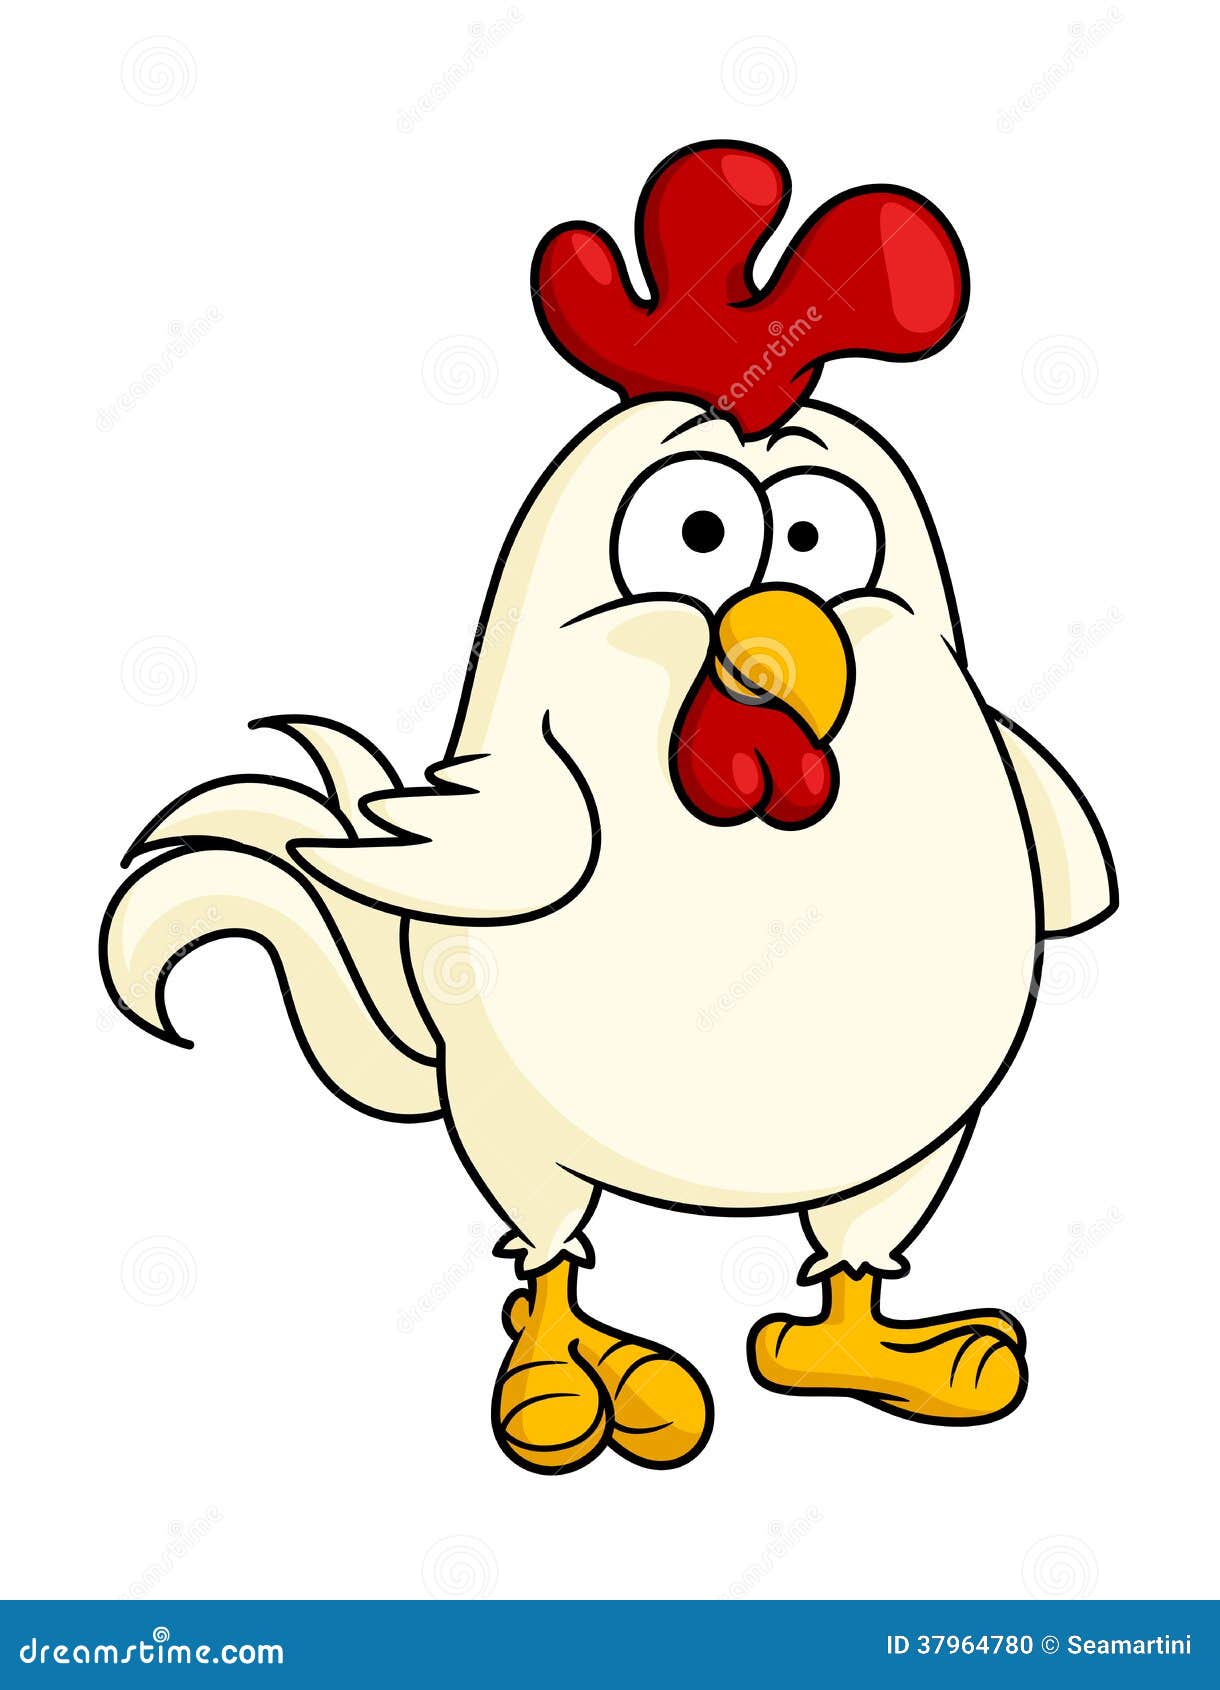 Funny Fat Little Rooster Or Cock Stock Photo - Image: 37964780